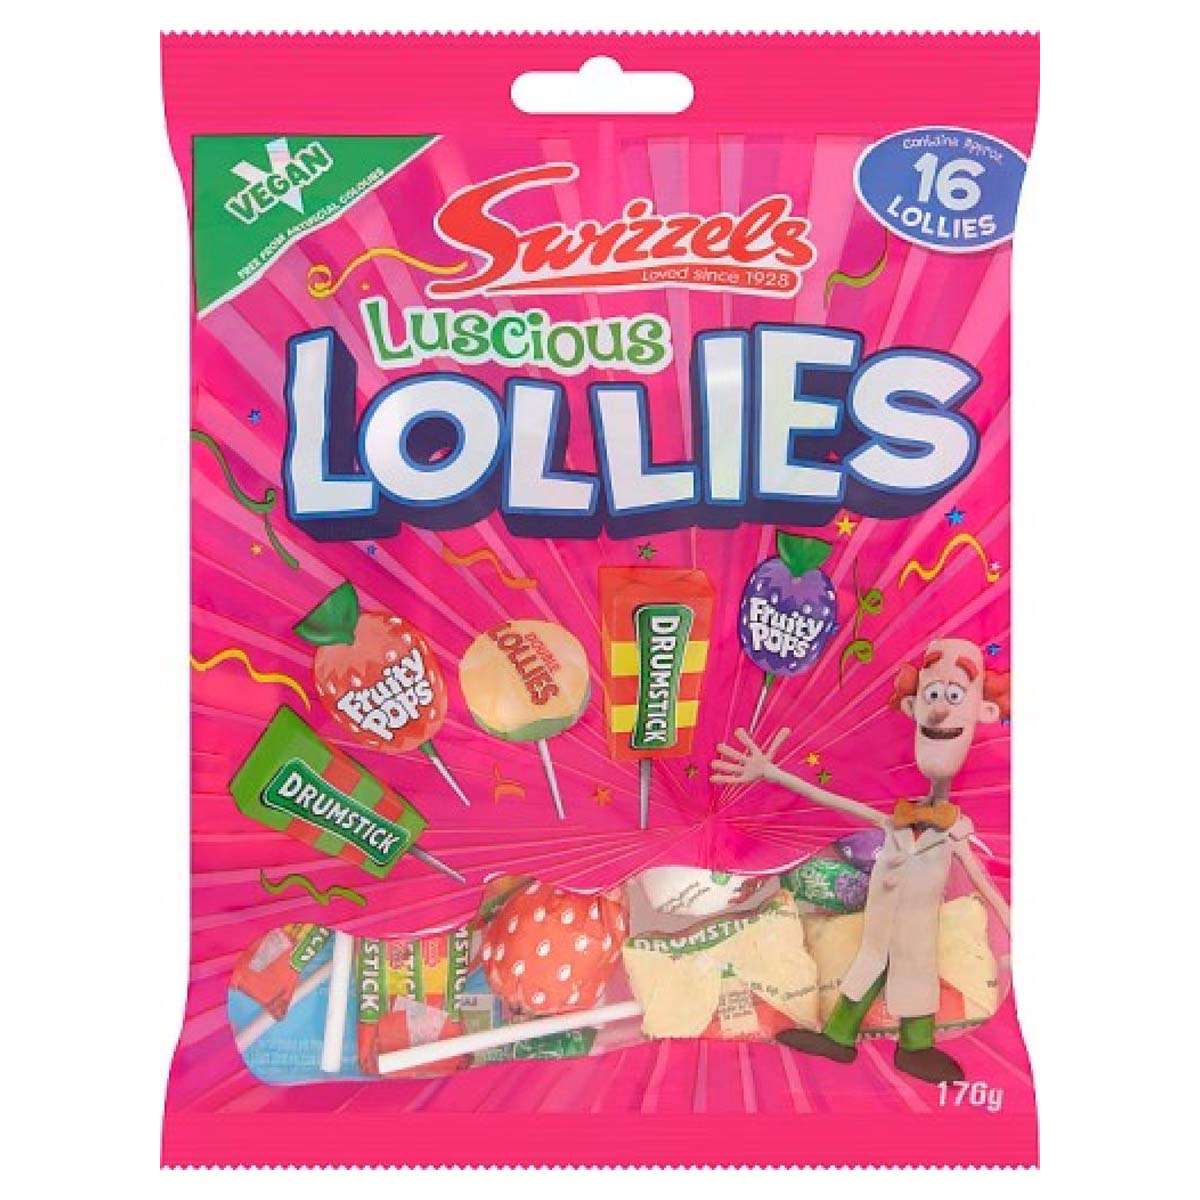 Swizzels - Luscious Lollies Bag - 176g - Continental Food Store